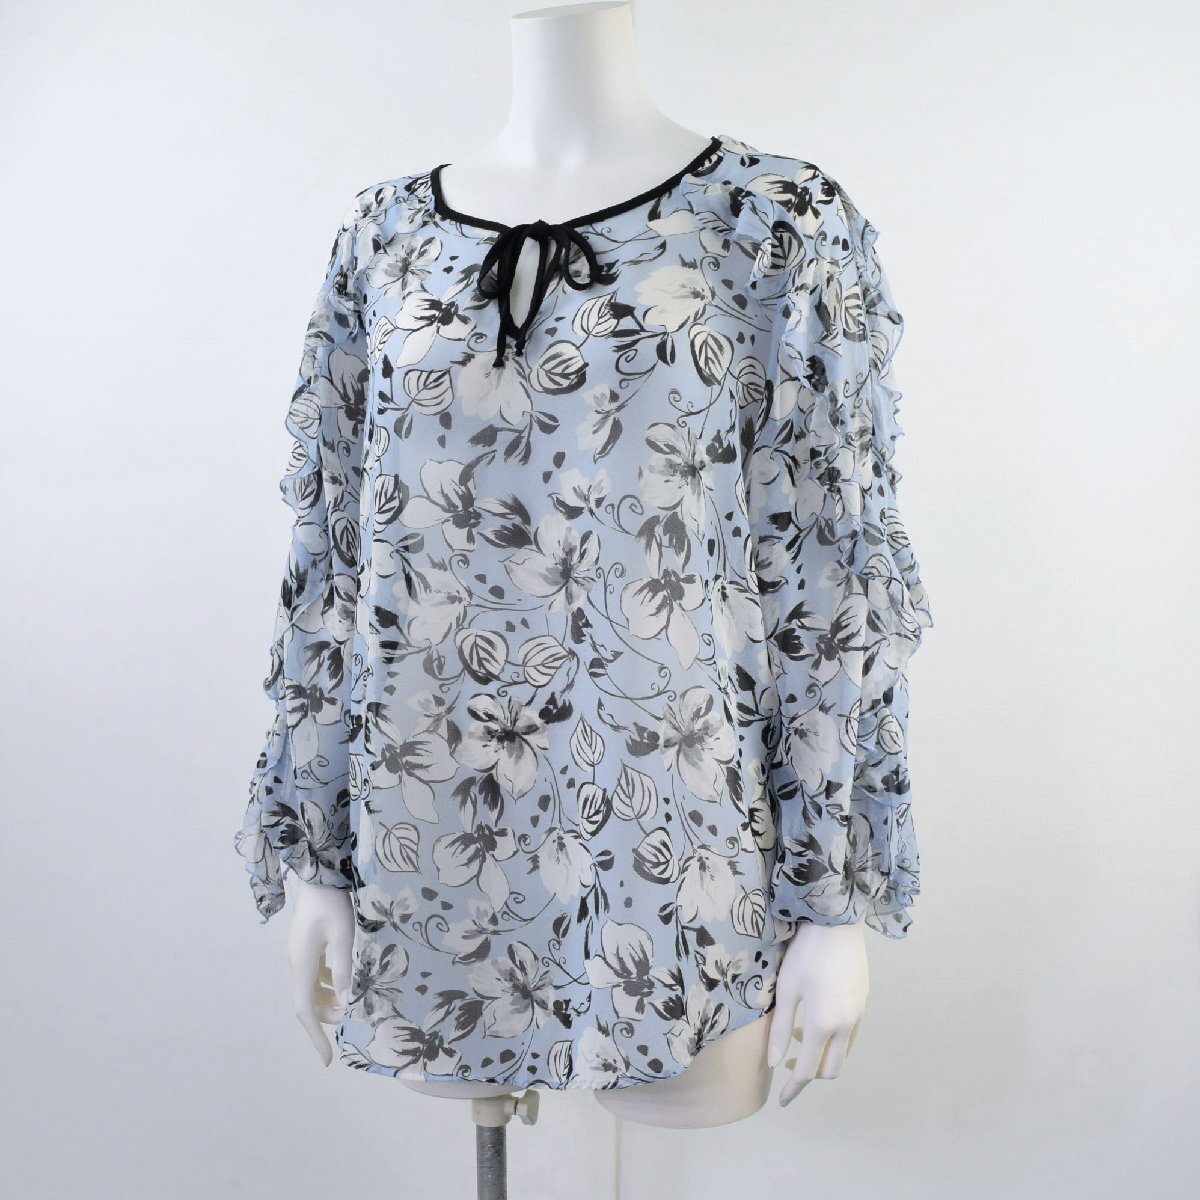 5000-NN00195* Nara Camicie NARACAMICIE* blue group flower chiffon print long sleeve pull over blouse Ⅳ(15 number ) large size 